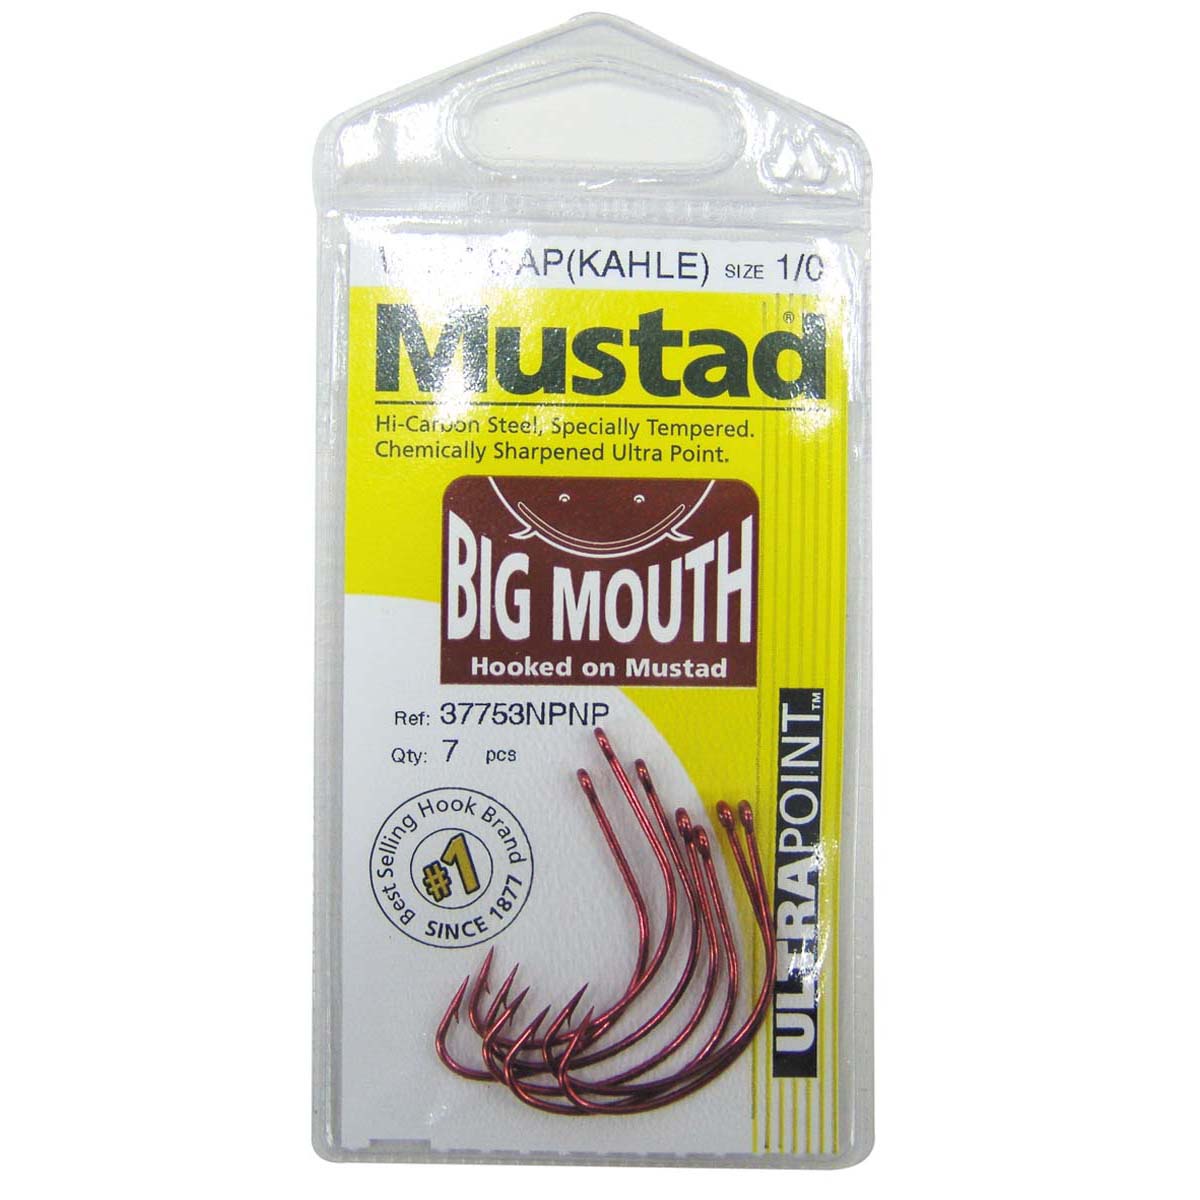 Mustad Big Mouth Hooks 2 / 0 6 Pack